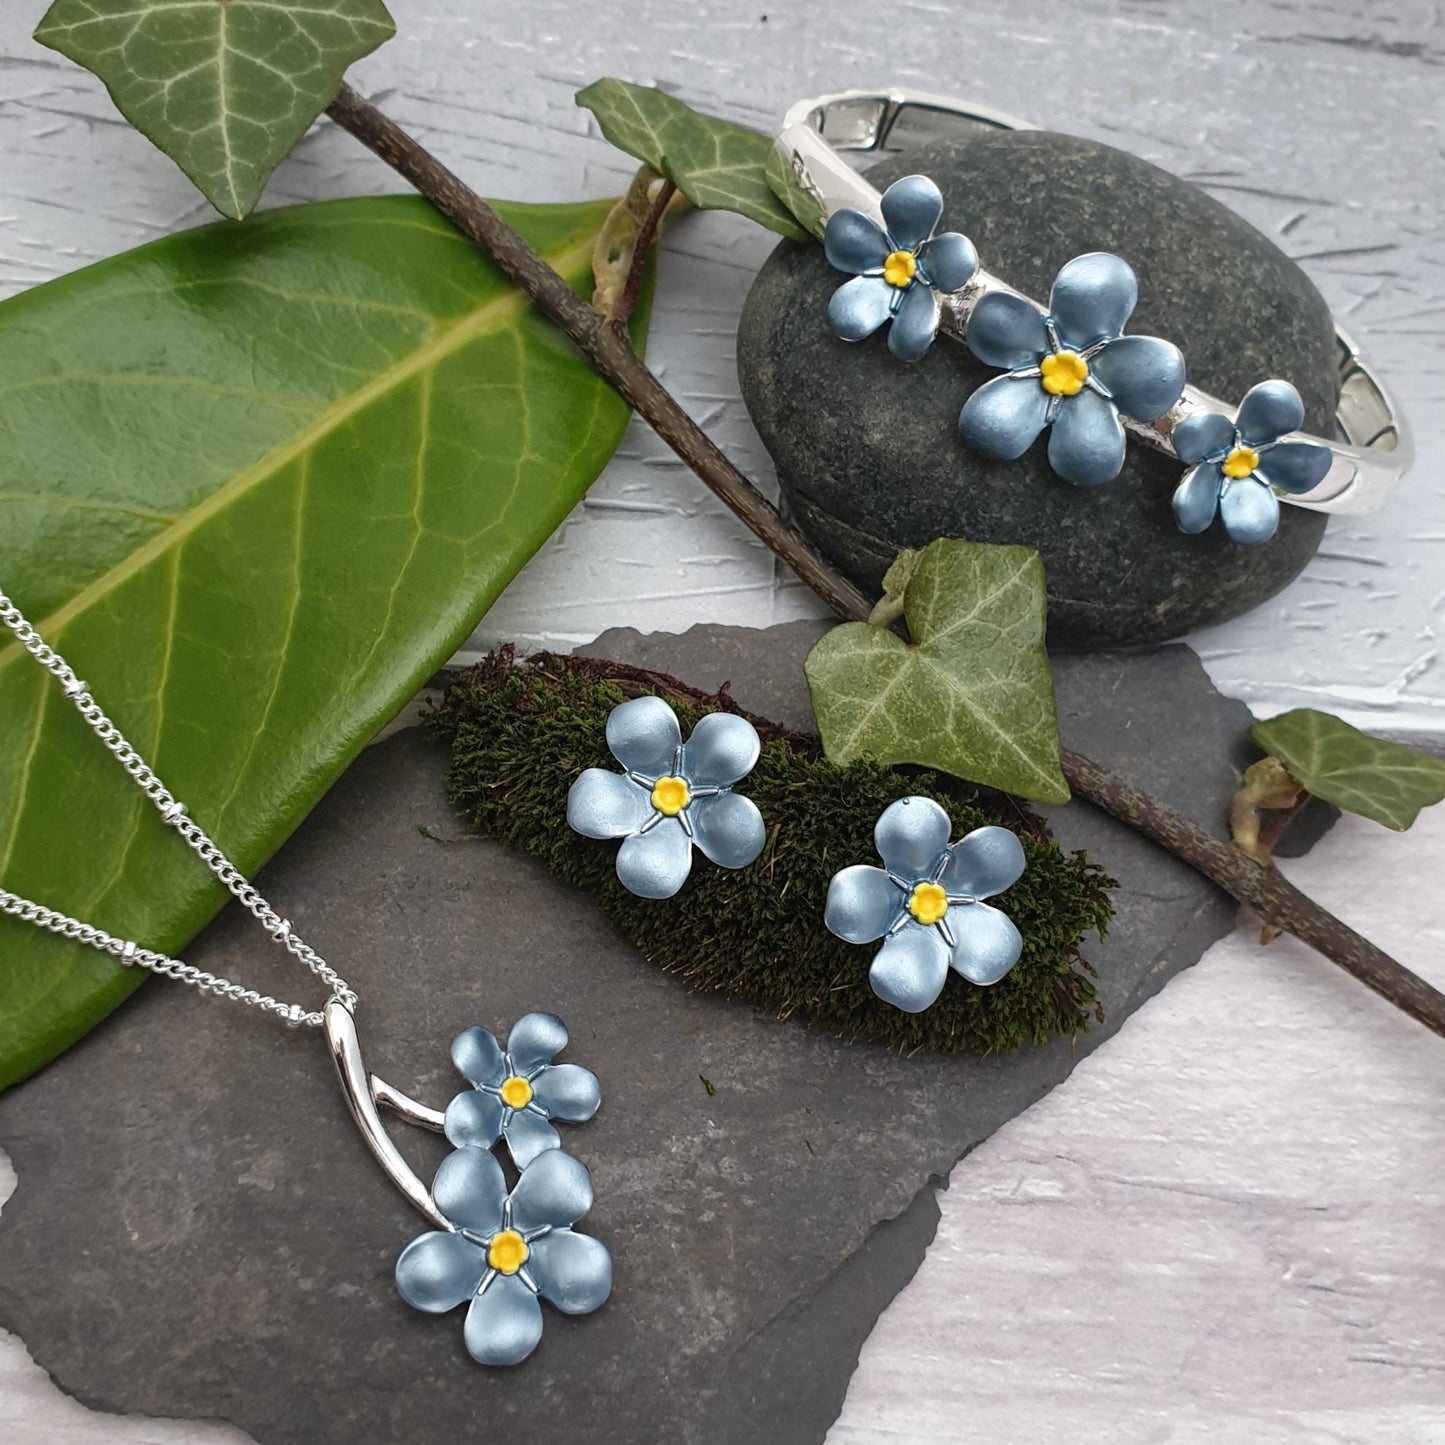 3 pieces of Forget-Me-Not themed jewellery; necklace, stud earrings and bracelet